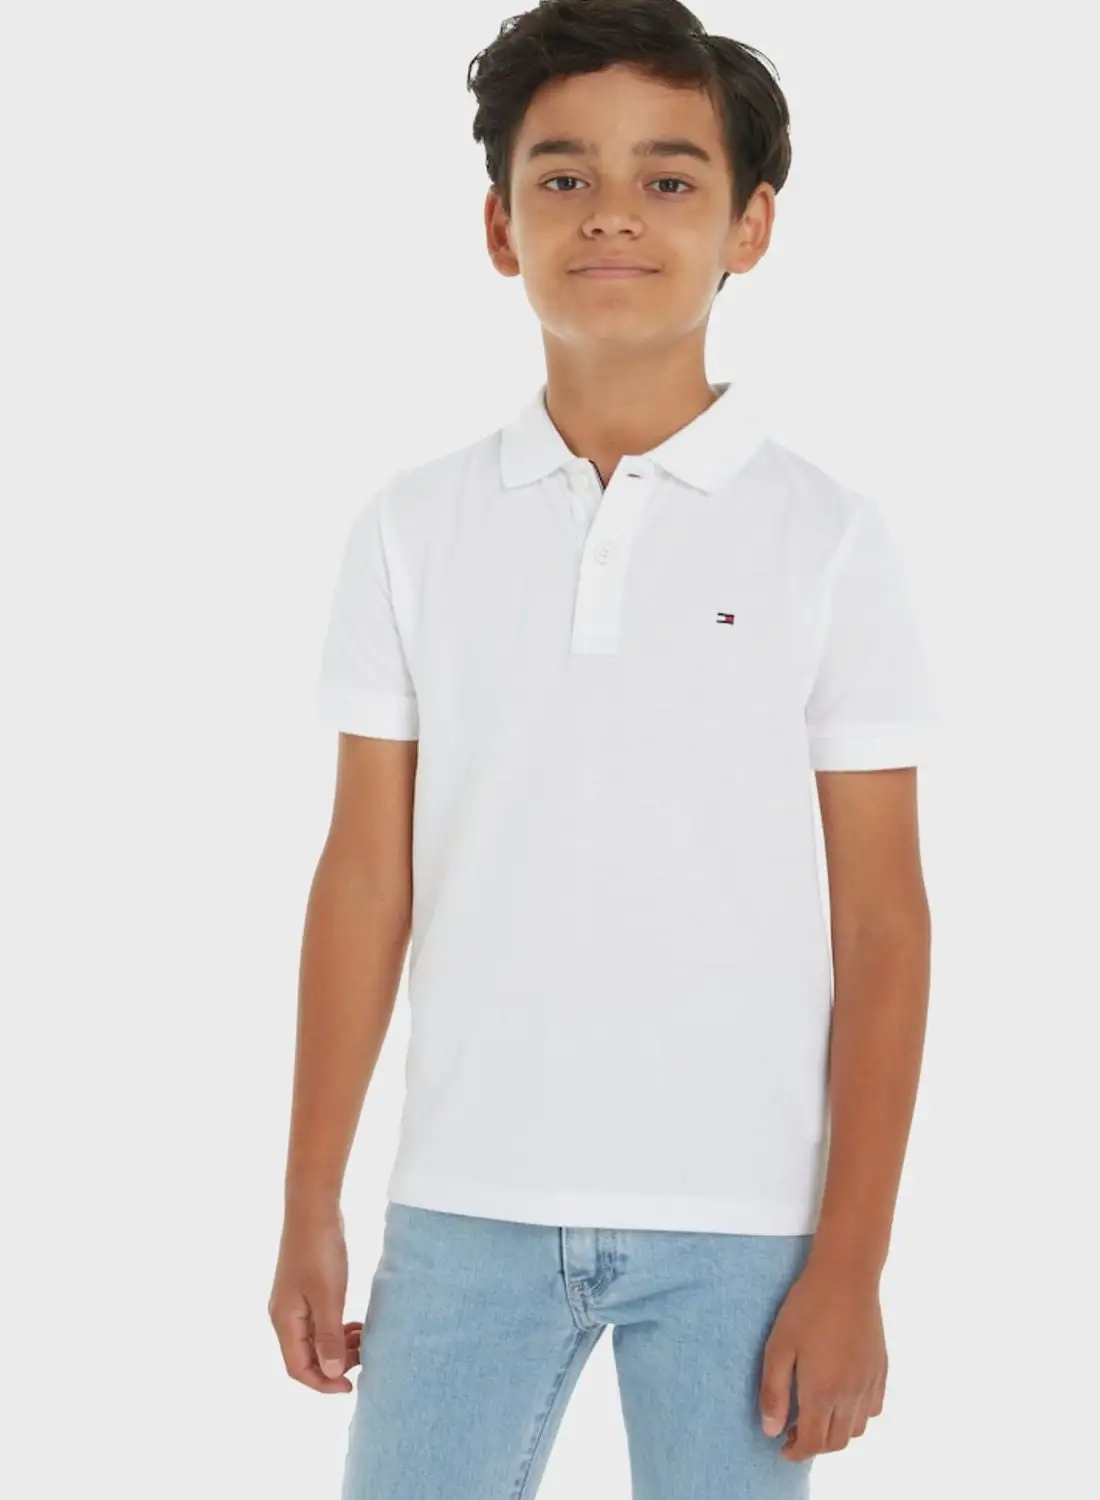 TOMMY HILFIGER Youth Logo Polo